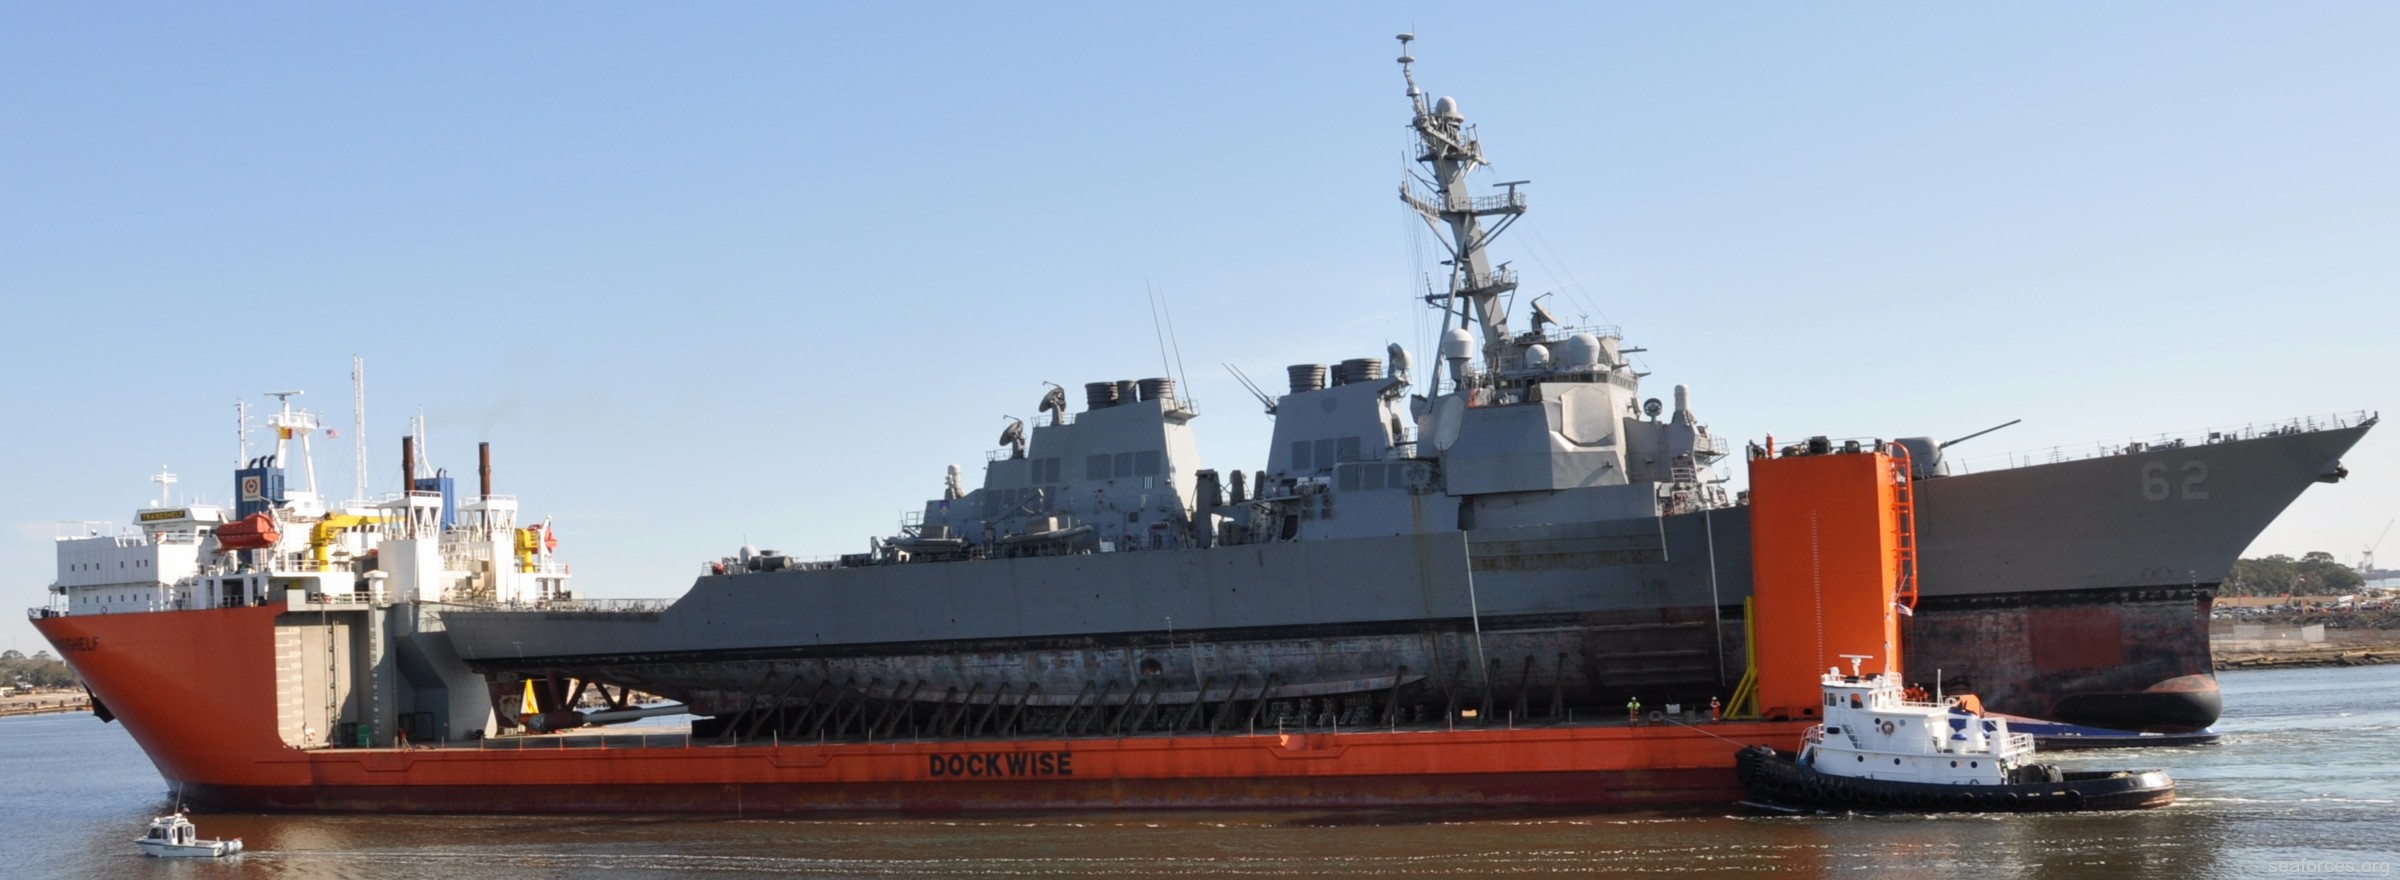 ddg-62 uss fitzgerald guided missile destroyer us navy 132 arriving pascagoula mississippi for repairs